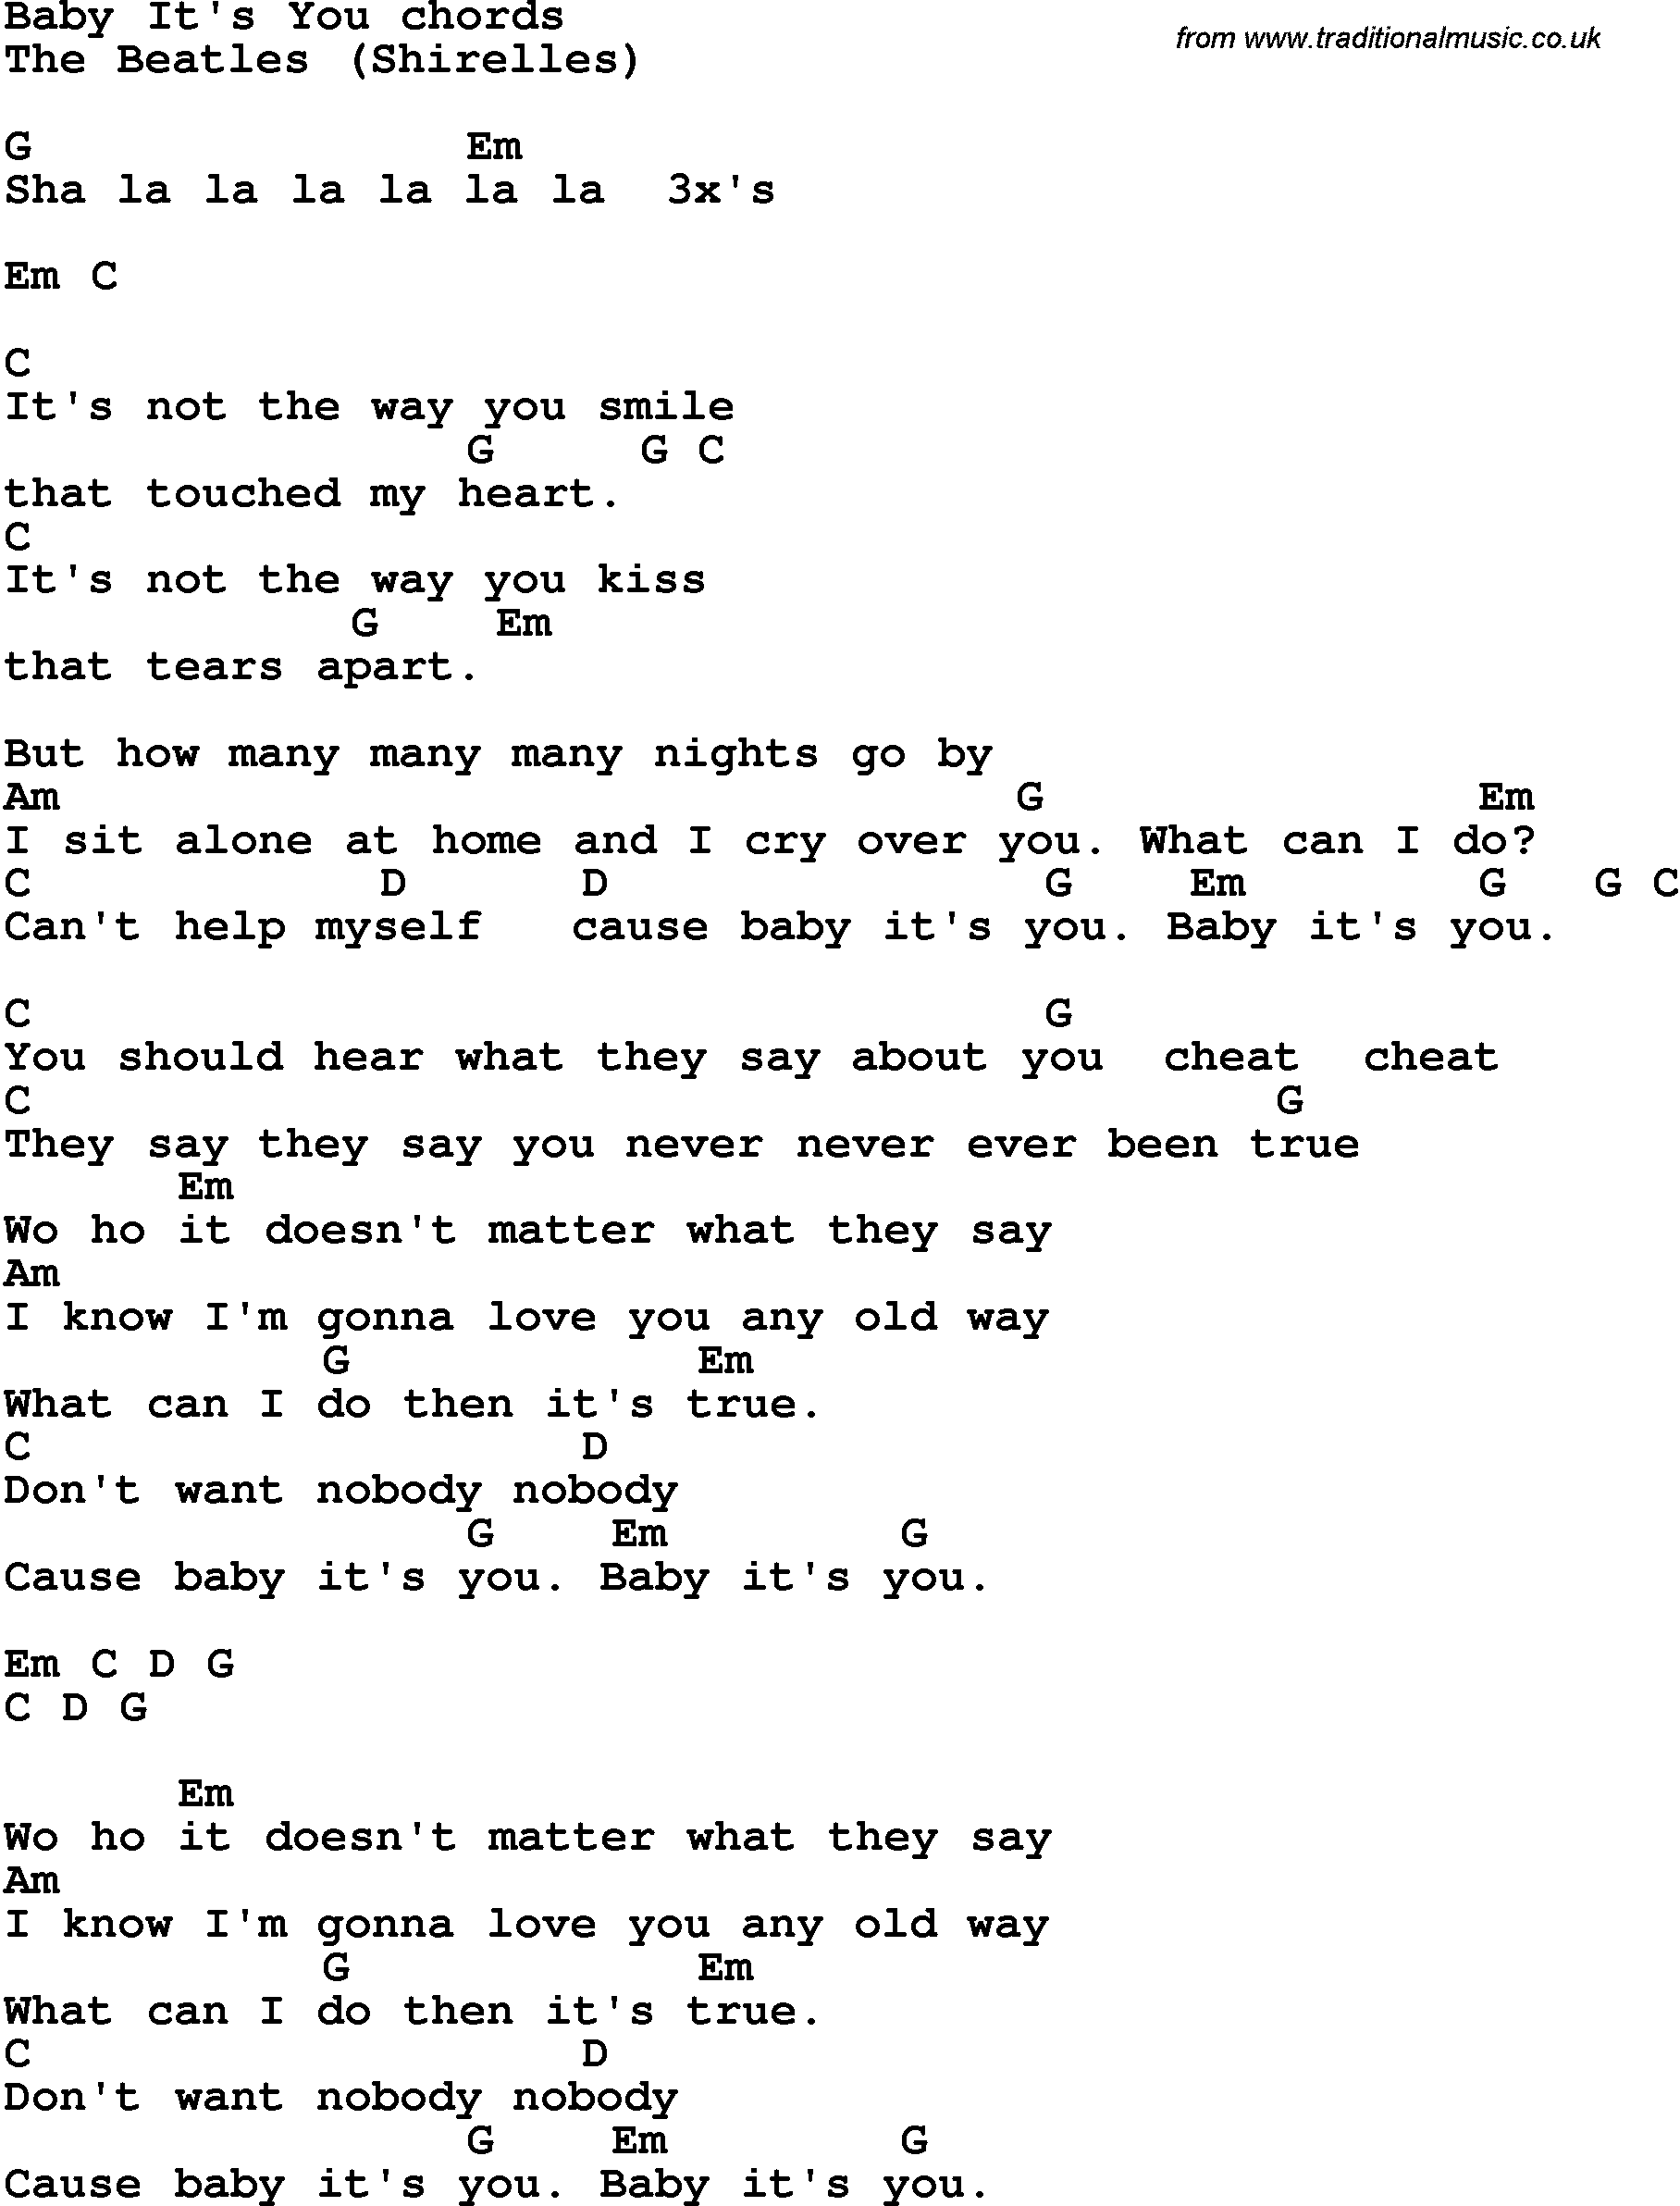 Song Lyrics with guitar chords for Baby It's You - The Beatles